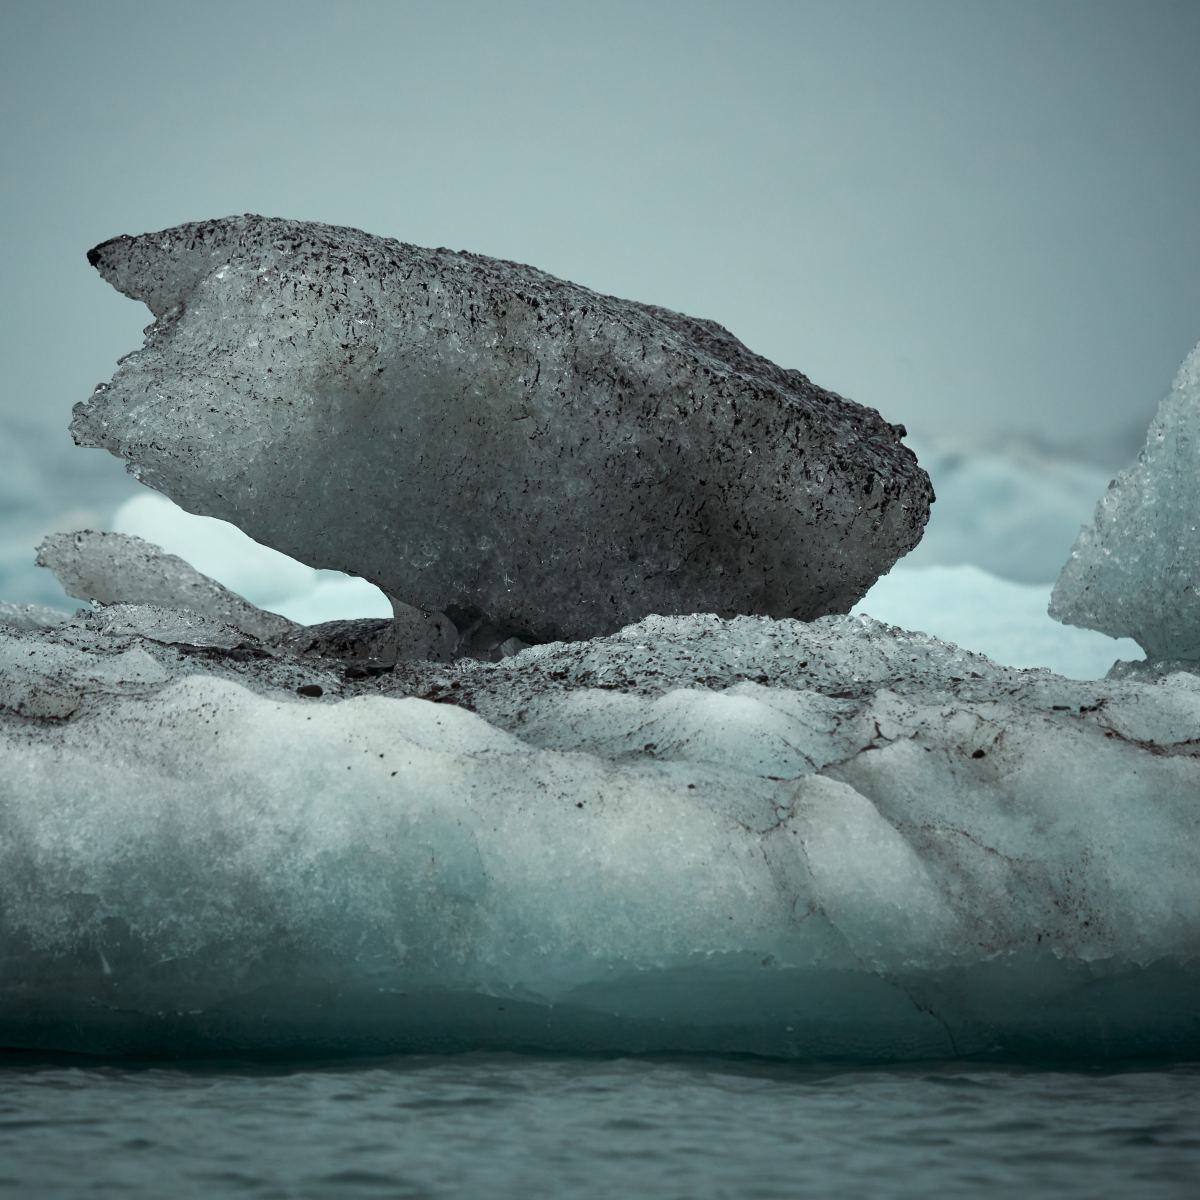 Polar ice has already begun to melt due to climate change. Eventually, rising sea levels could displace millions of coastal humans and animals.